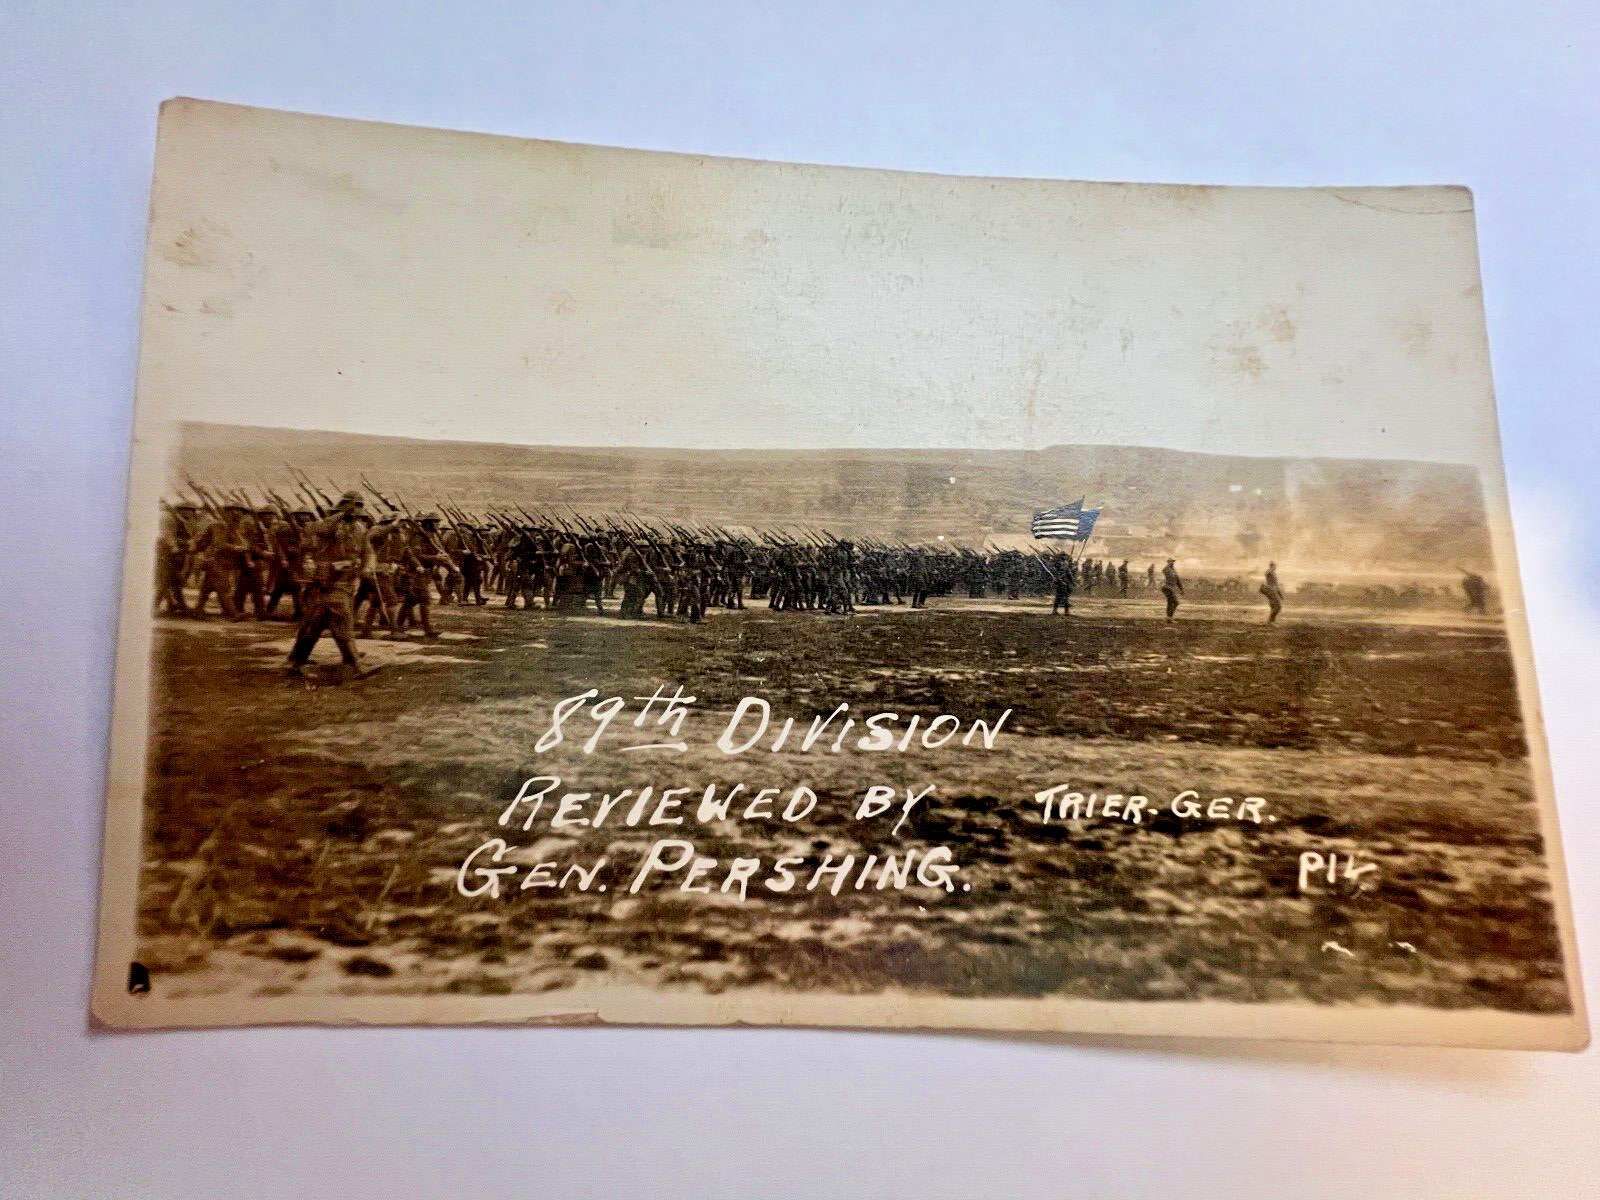 Vintage Real Photo 89th Division Reviewed By General Pershing WW1 Postcard